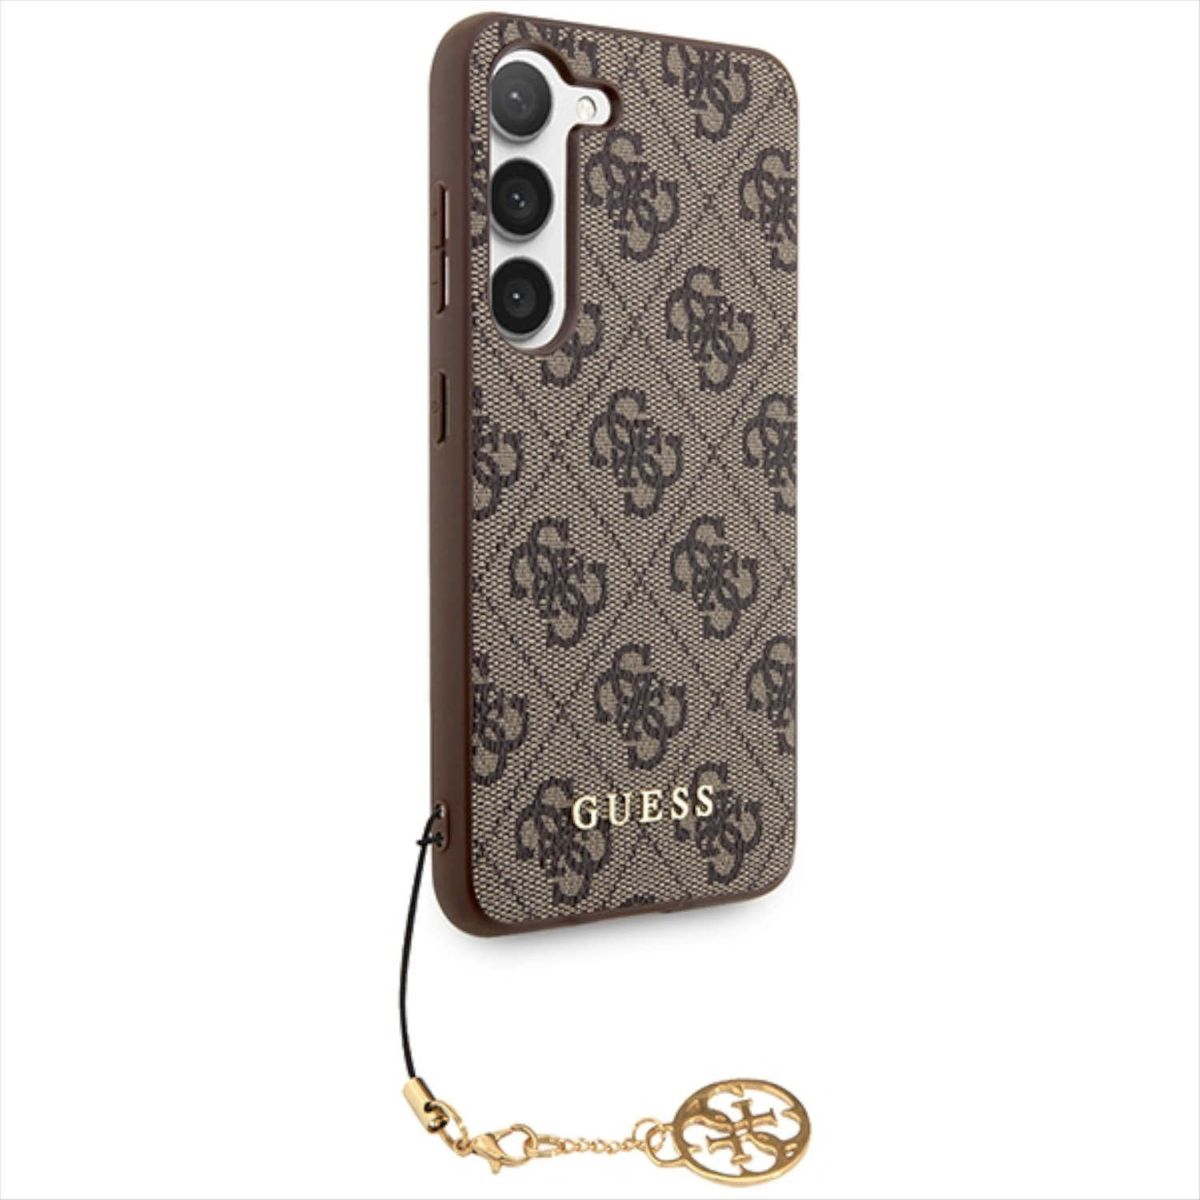 GUESS Charms Case, Collection Backcover, S23, Galaxy Samsung, Design Braun